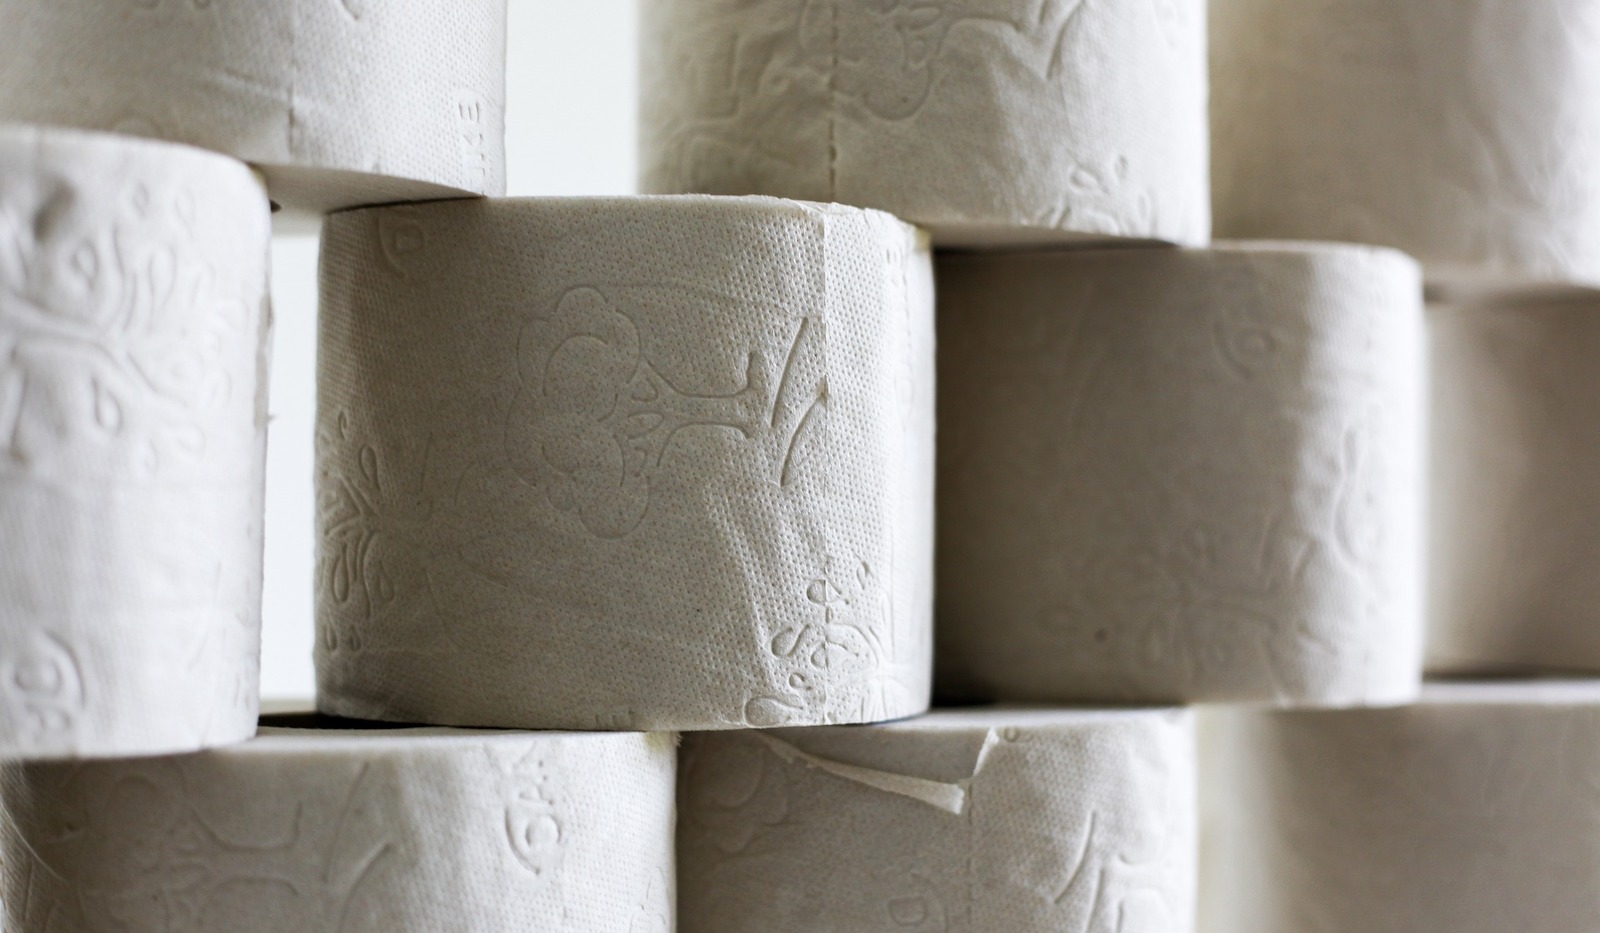 Which big toilet paper brands are best for our forests?